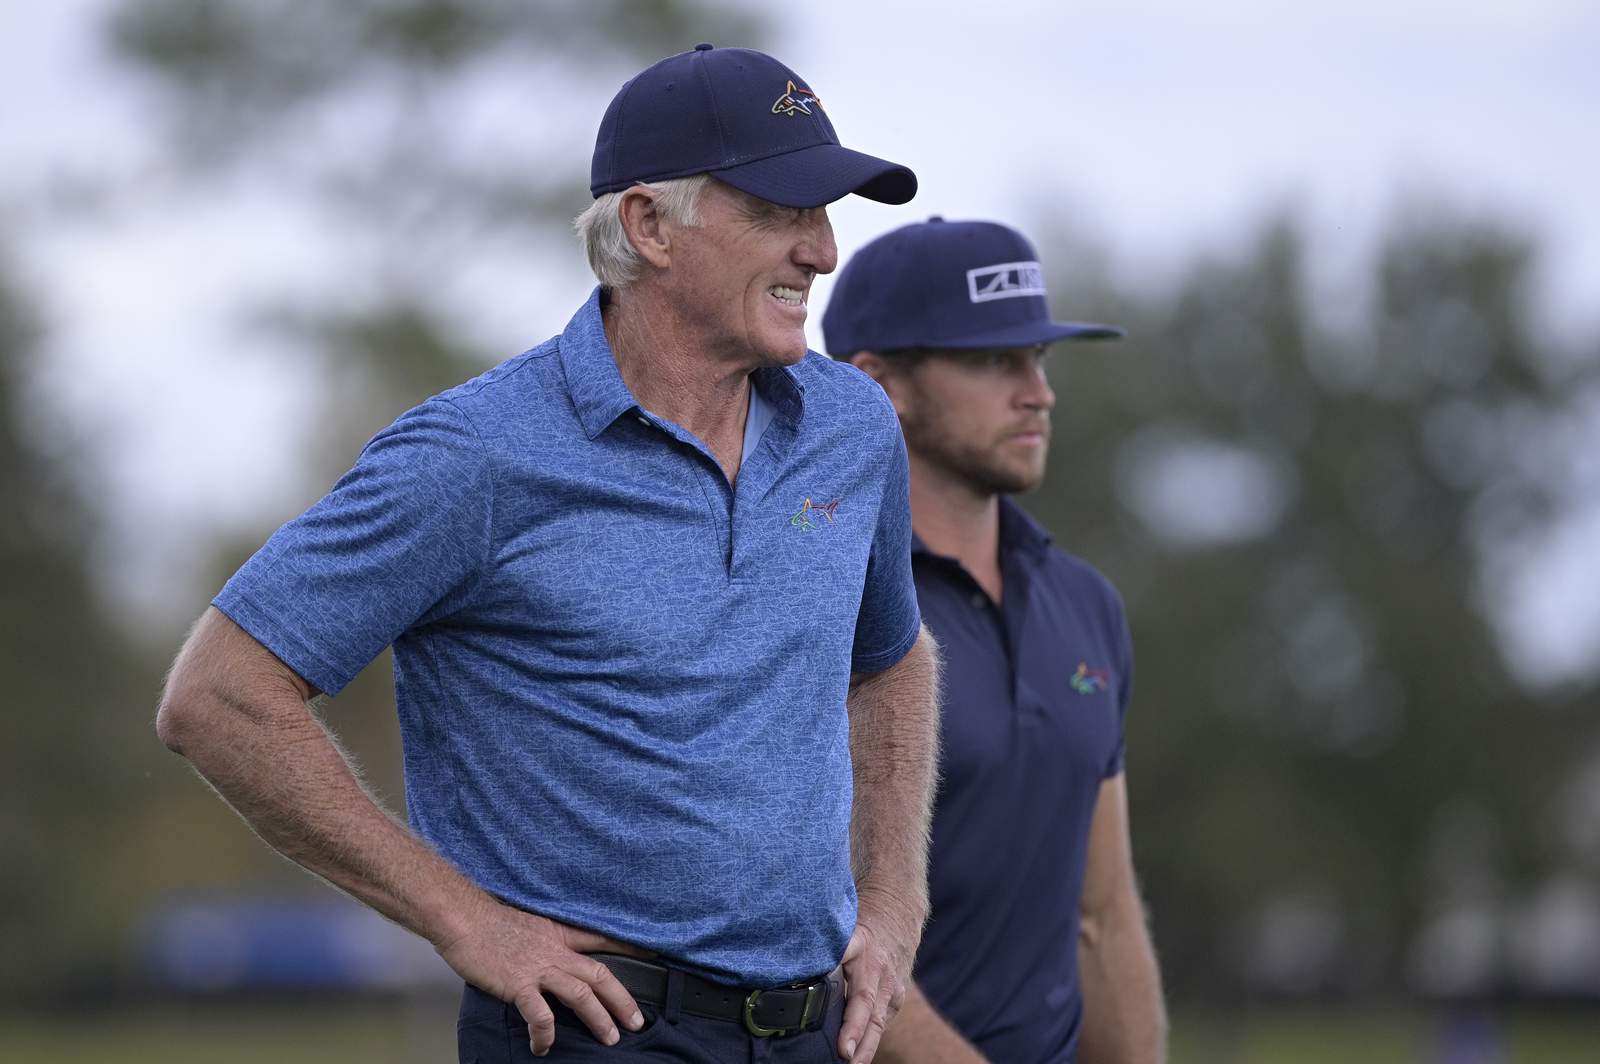 Golfer Greg Norman, 65, hospitalized with COVID symptoms